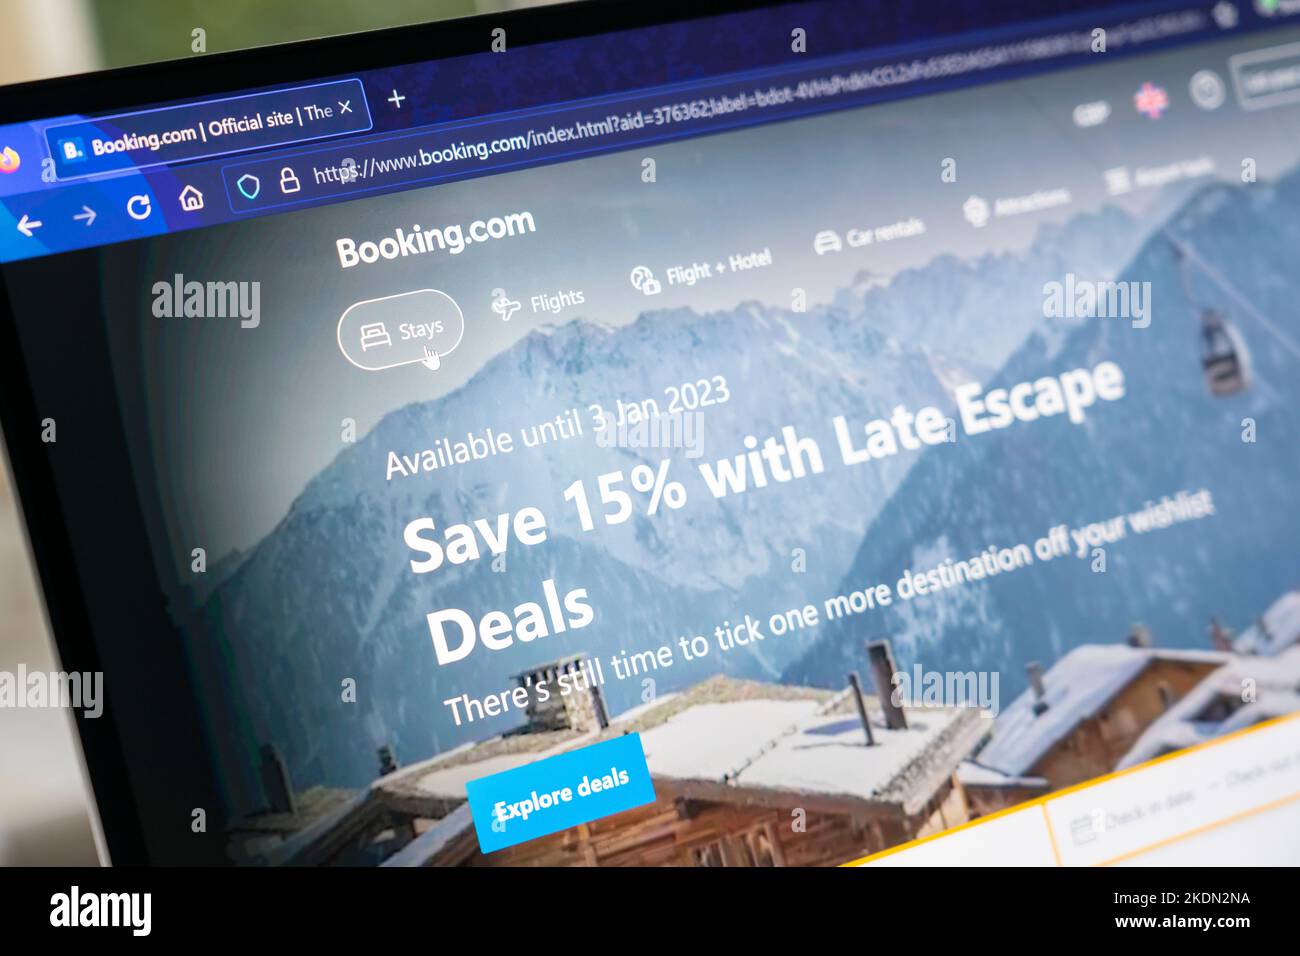 Booking.com homepage - it is a Dutch online travel agency for lodging reservations & other travel products, and a subsidiary of Booking Holdings Stock Photo